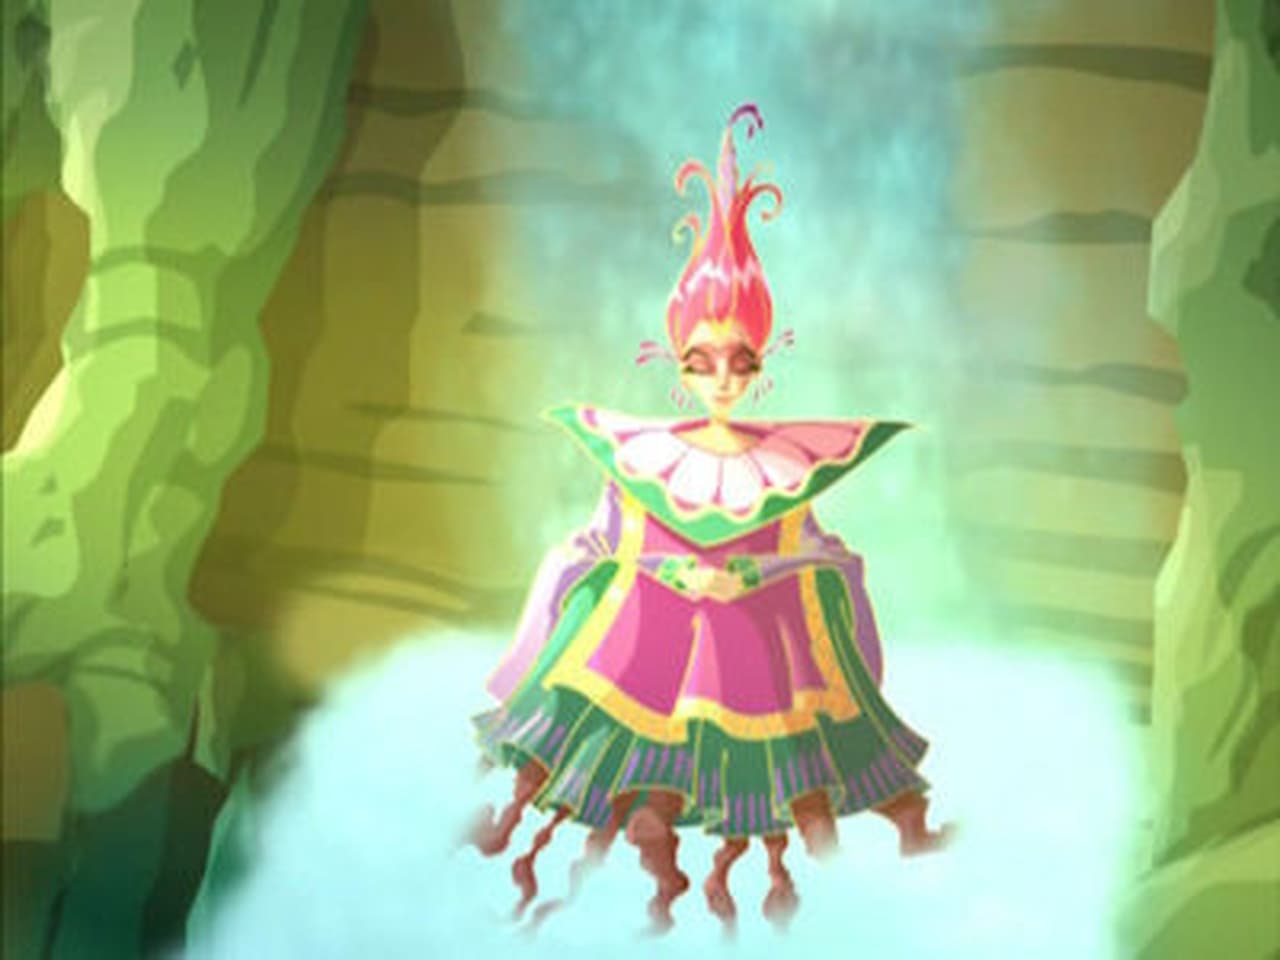 Winx Club - Season 3 Episode 12 : Tears From The Black Willow